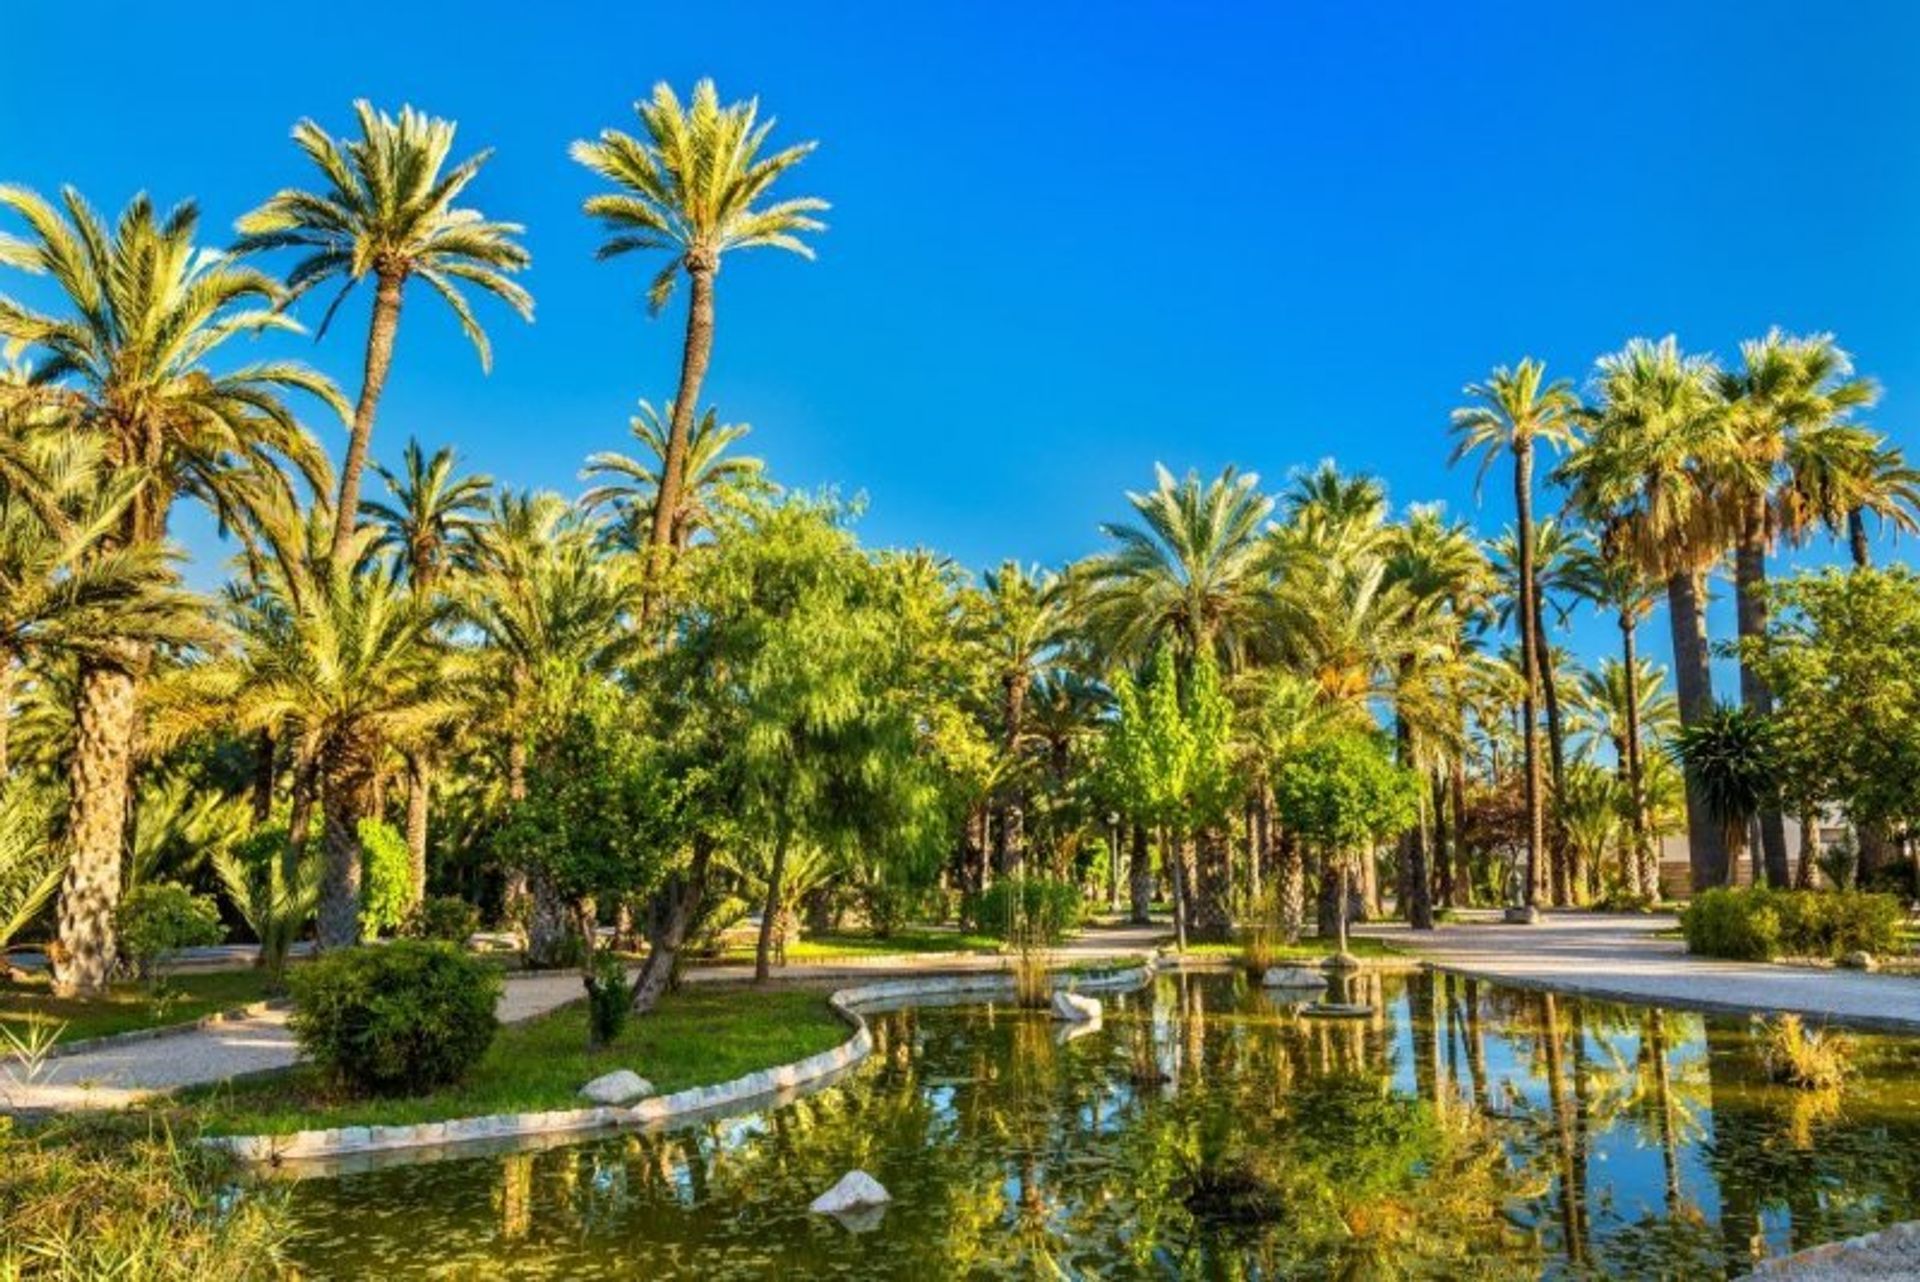 Only 20 minutes away from Gran Alacant, Elche Palmeral is home to over 200,000 palm trees